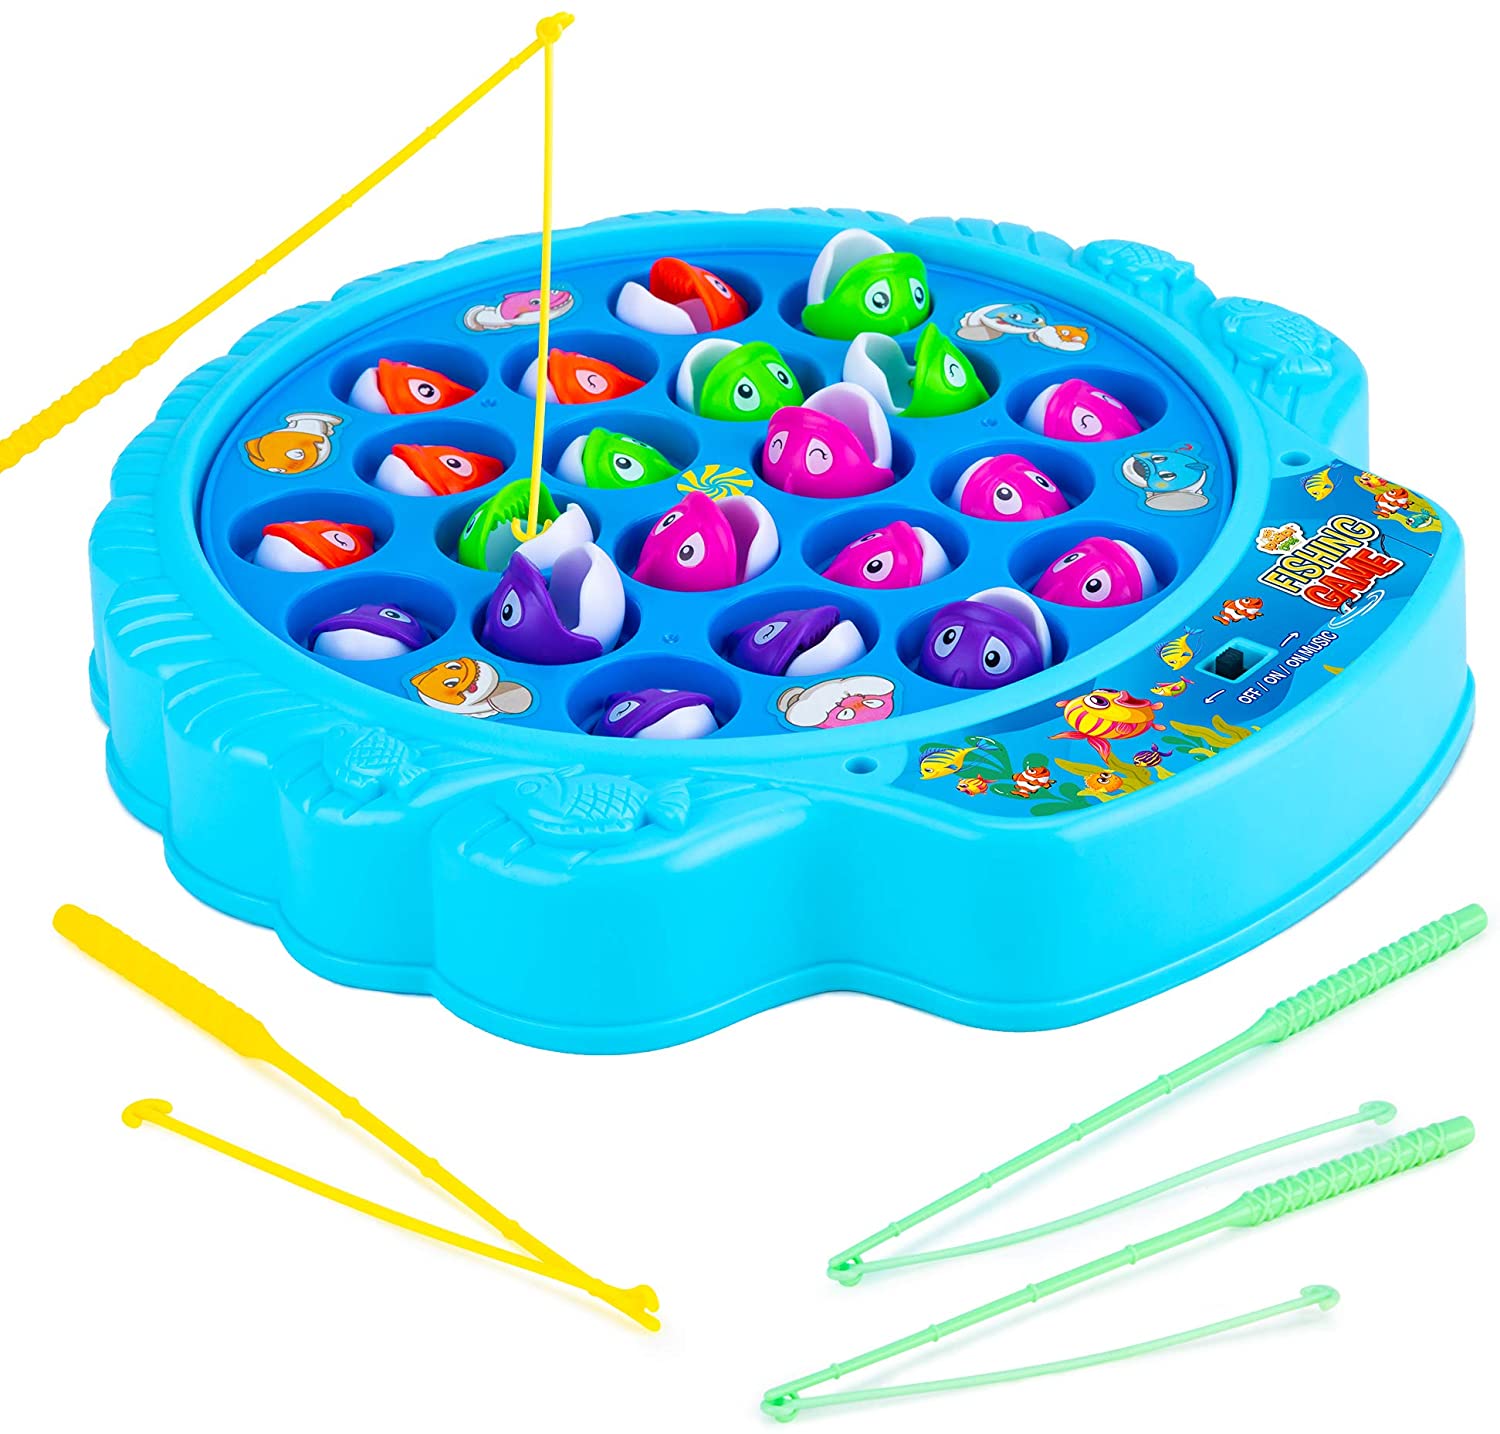 IPIDIPI TOYS Fishing Game Play Set - 21 Fish, 4 Poles, Rotating Board  On-Off Music Switch - Family Board Game, Toy for Kids and Toddlers Age 3 4  5 6 7 and Up 